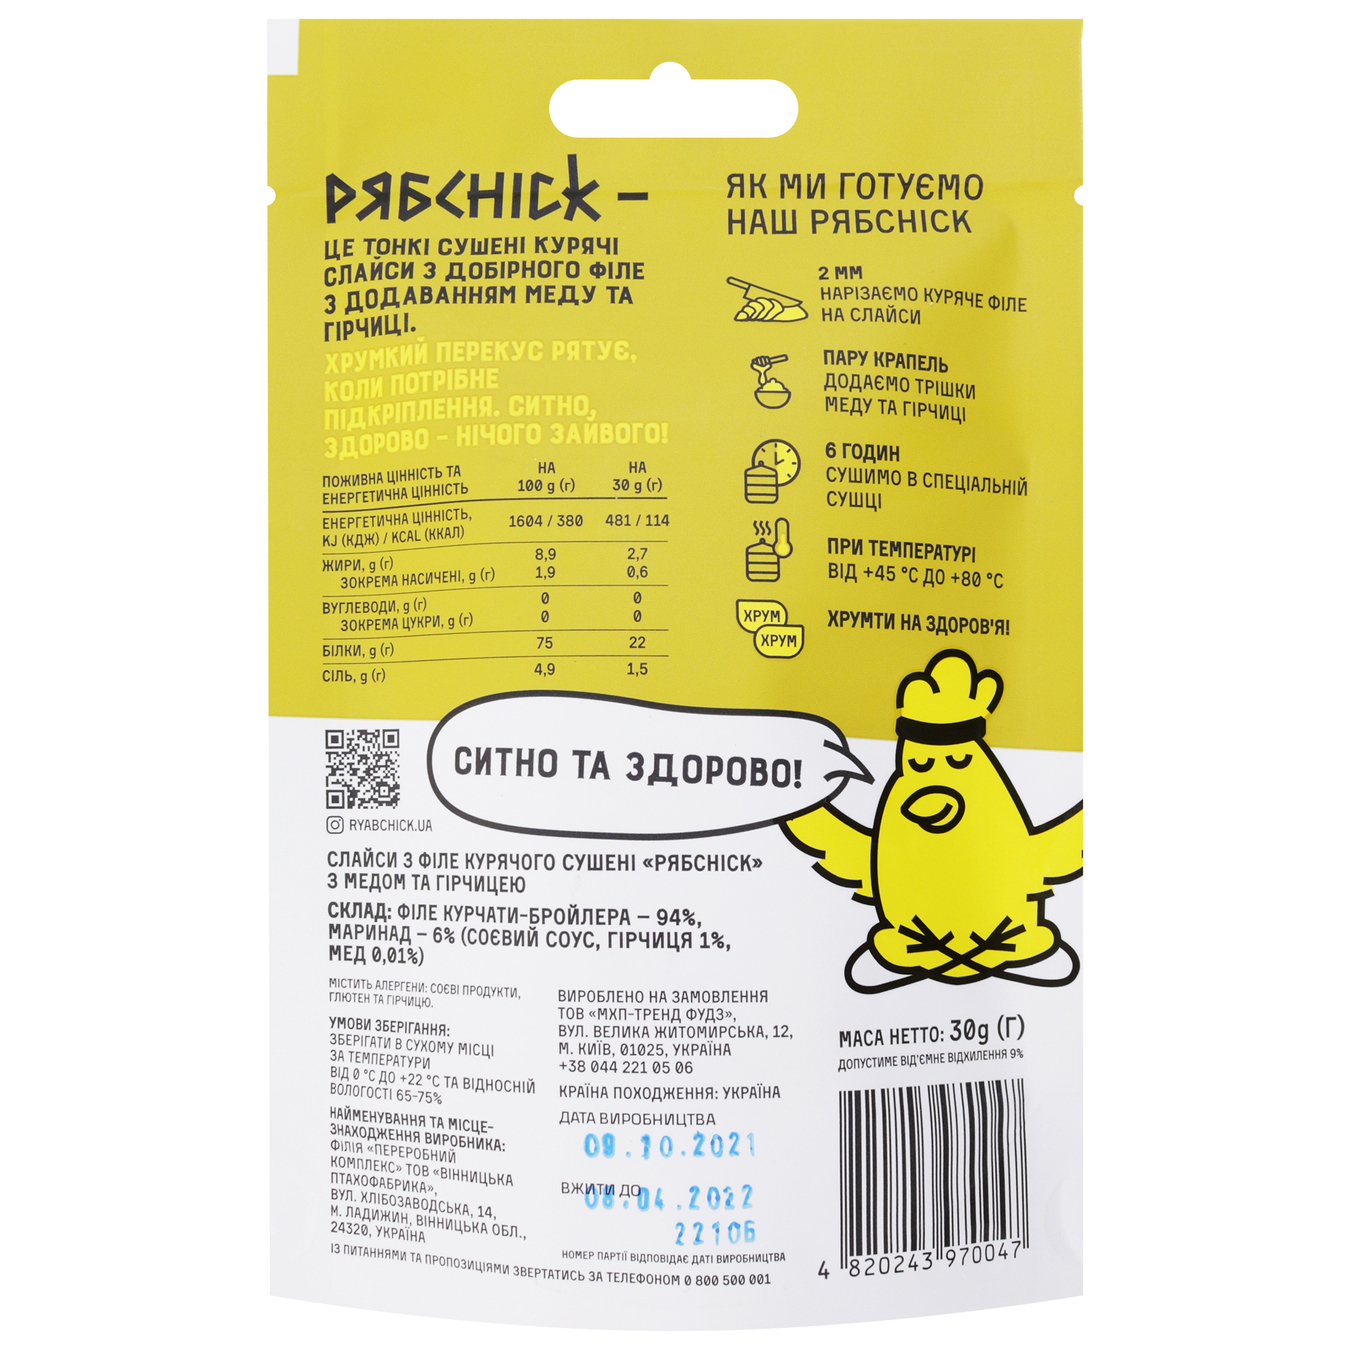 RyabChick dried chicken slices with mustard and honey 30g 2